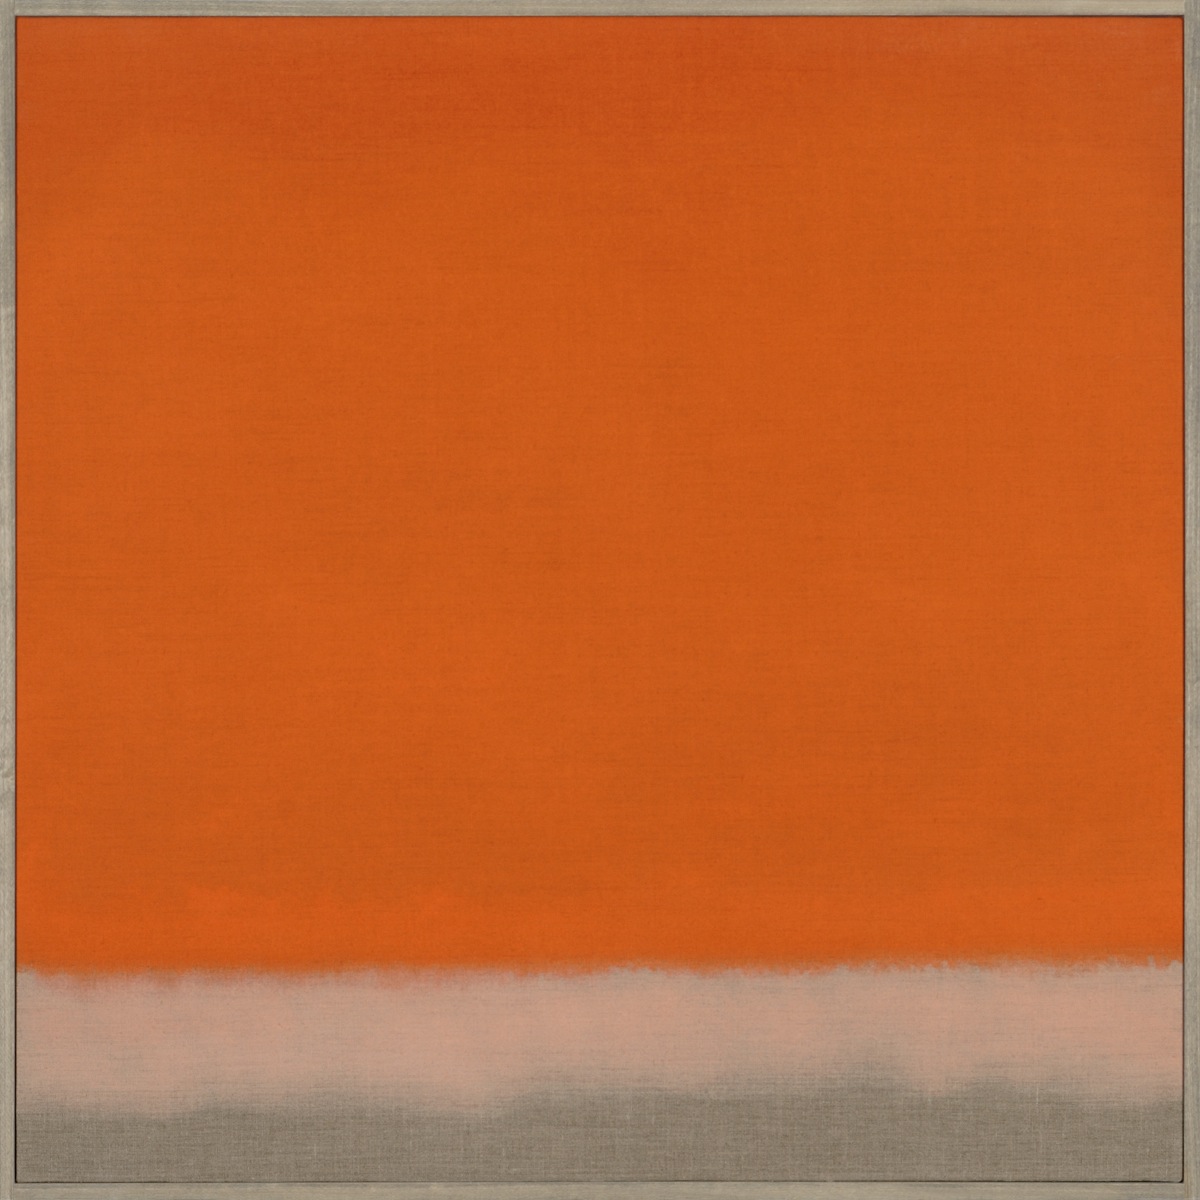 Untitled (Red Orange), 2014.<br/>Oil on linen, 36" x 36".<br/>Private Collection.